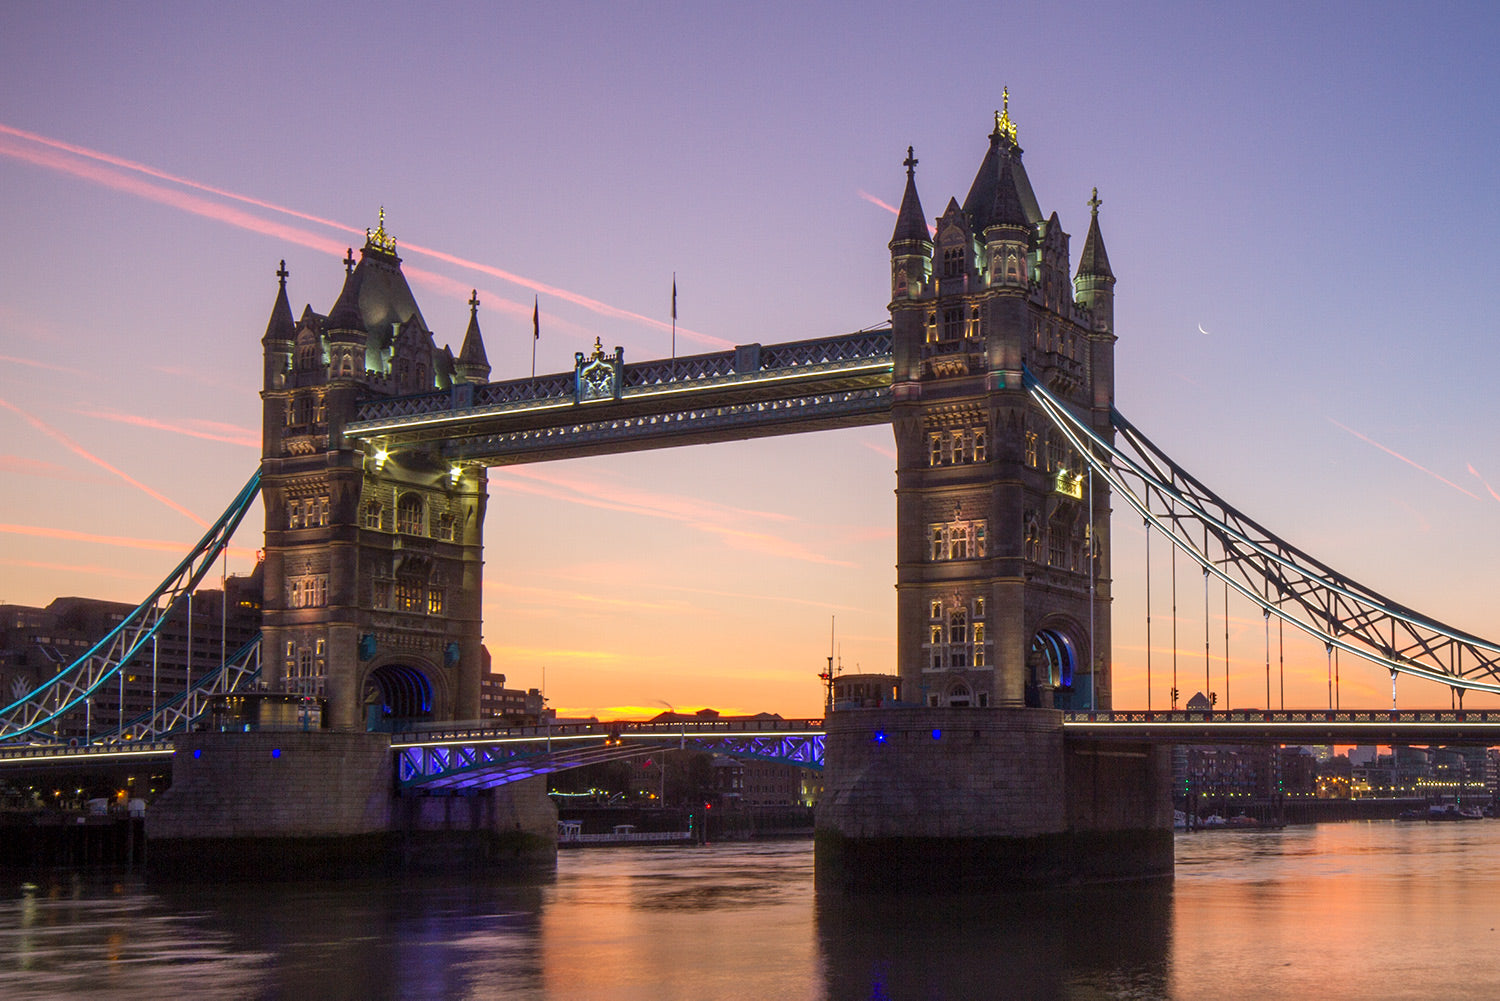 The dawn breaks over Tower Bridge and the River Thames as the sky changes colour to light purples and yellow.